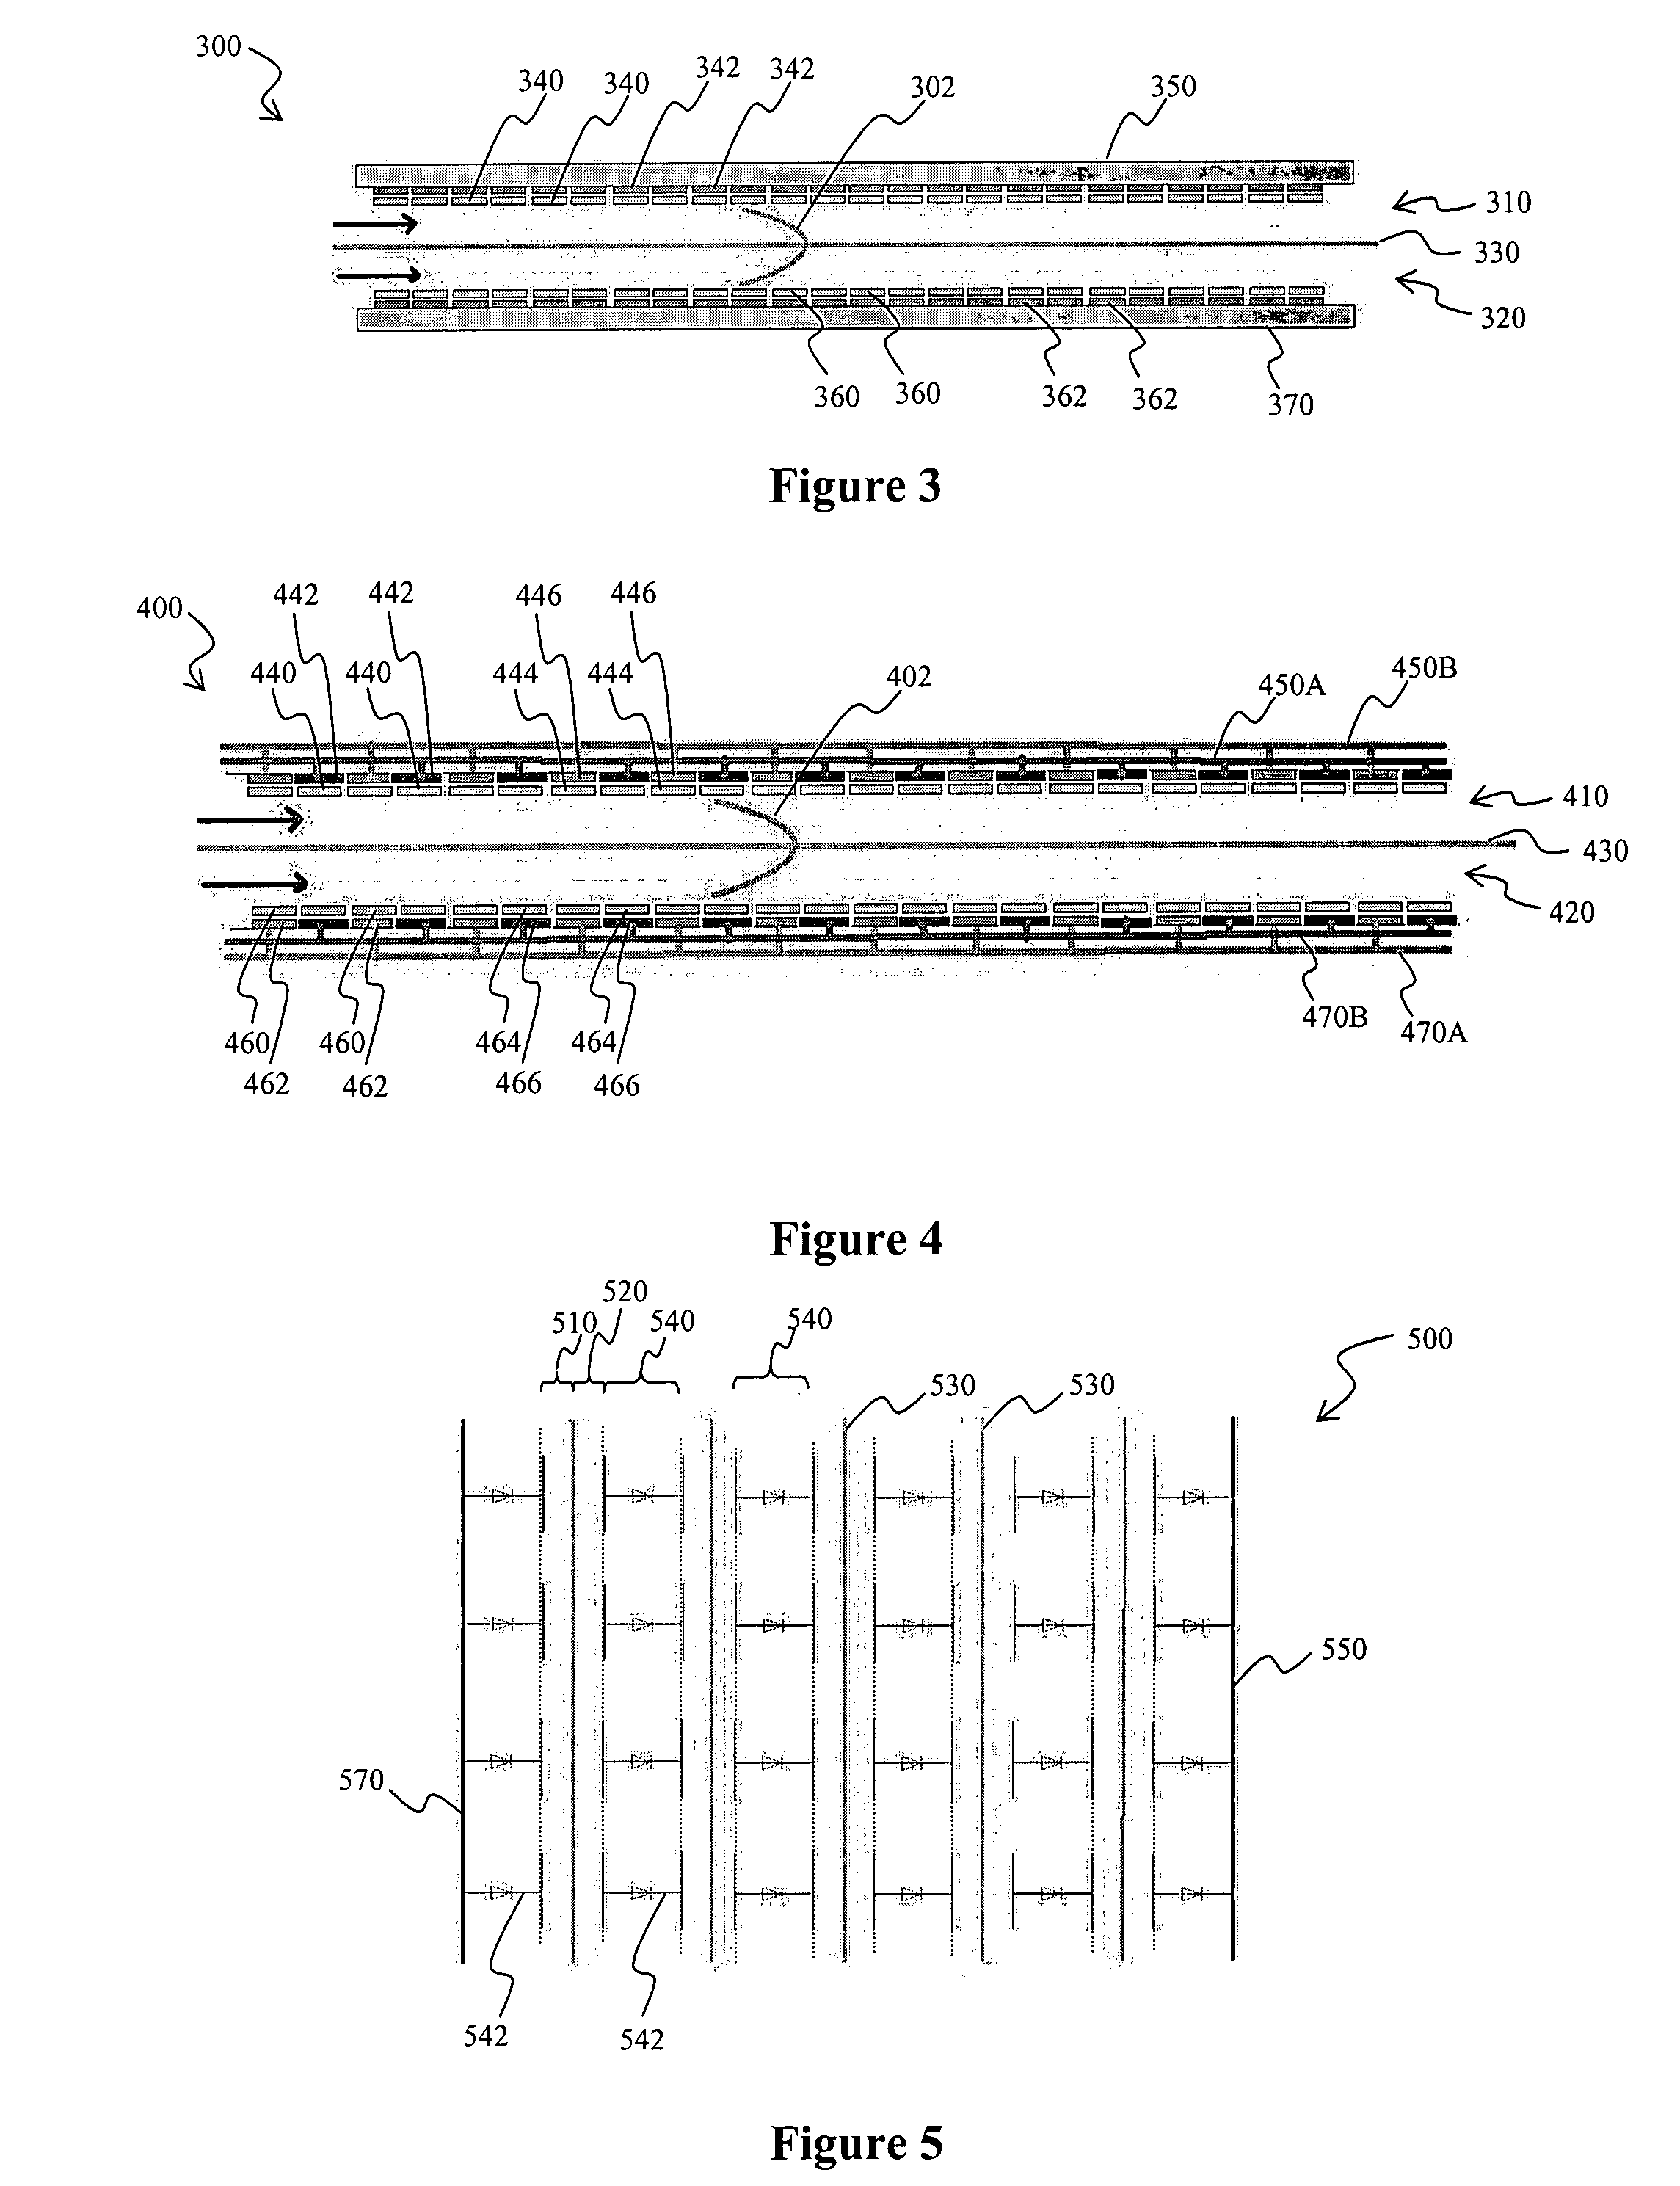 Micro gap flow through electrochemical devices with self adjusting reactive surfaces